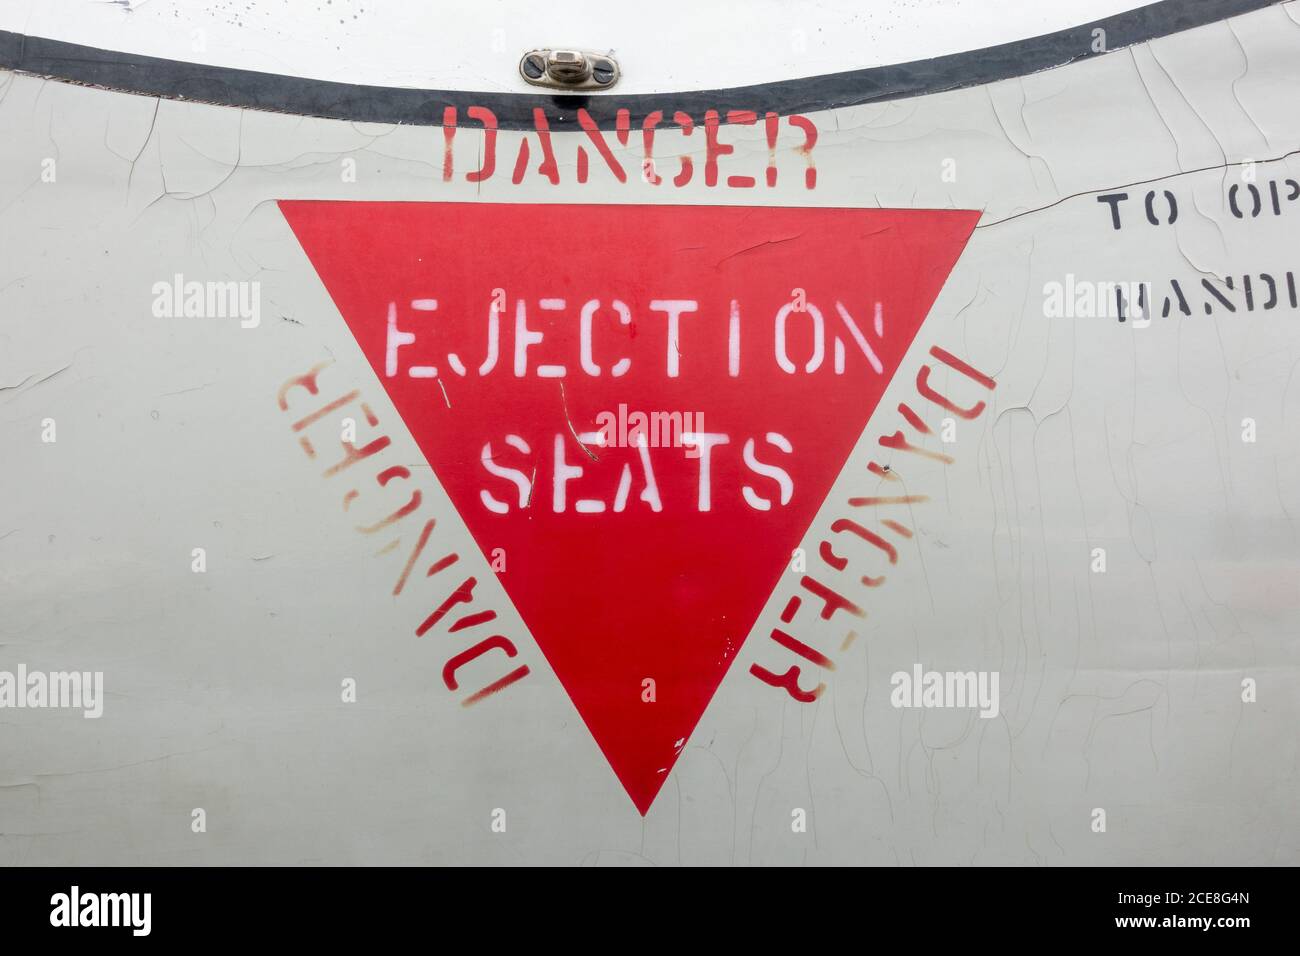 Ejection Seat warning notice on a De Havilland DH115 Vampire T.11 jet fighter on display in the De Havilland Museum, London Colney, UK. Stock Photo